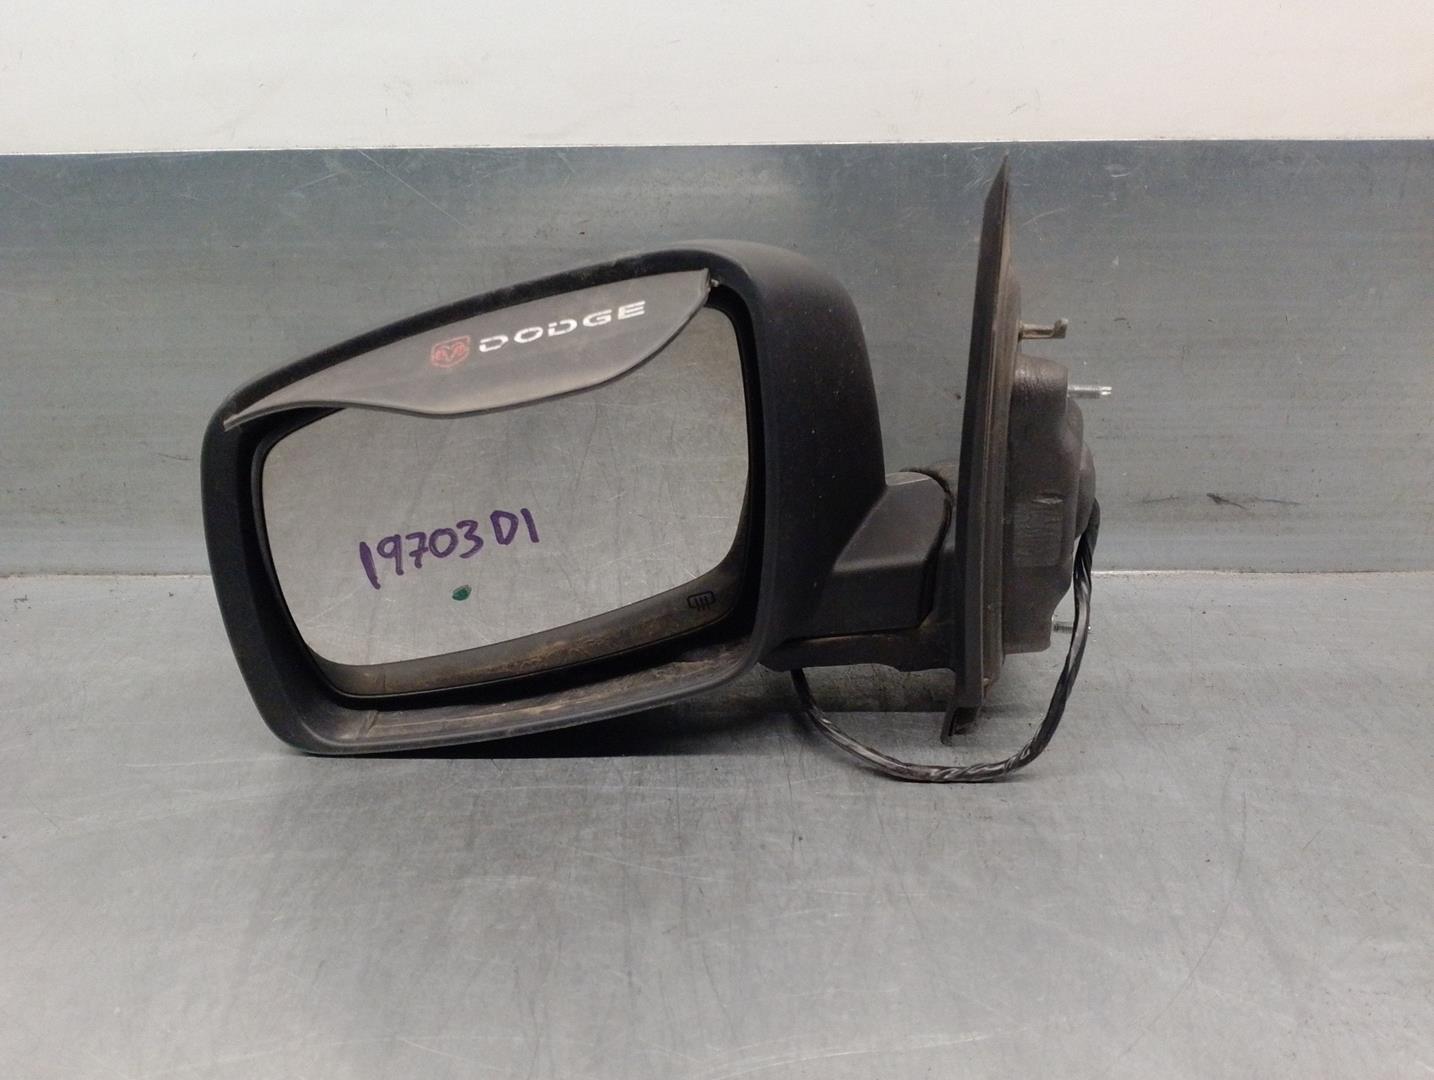 AUDI A4 B7/8E (2004-2008) Left Side Wing Mirror 1GE011A4AC, 7PINES, 5PUERTAS 24209737